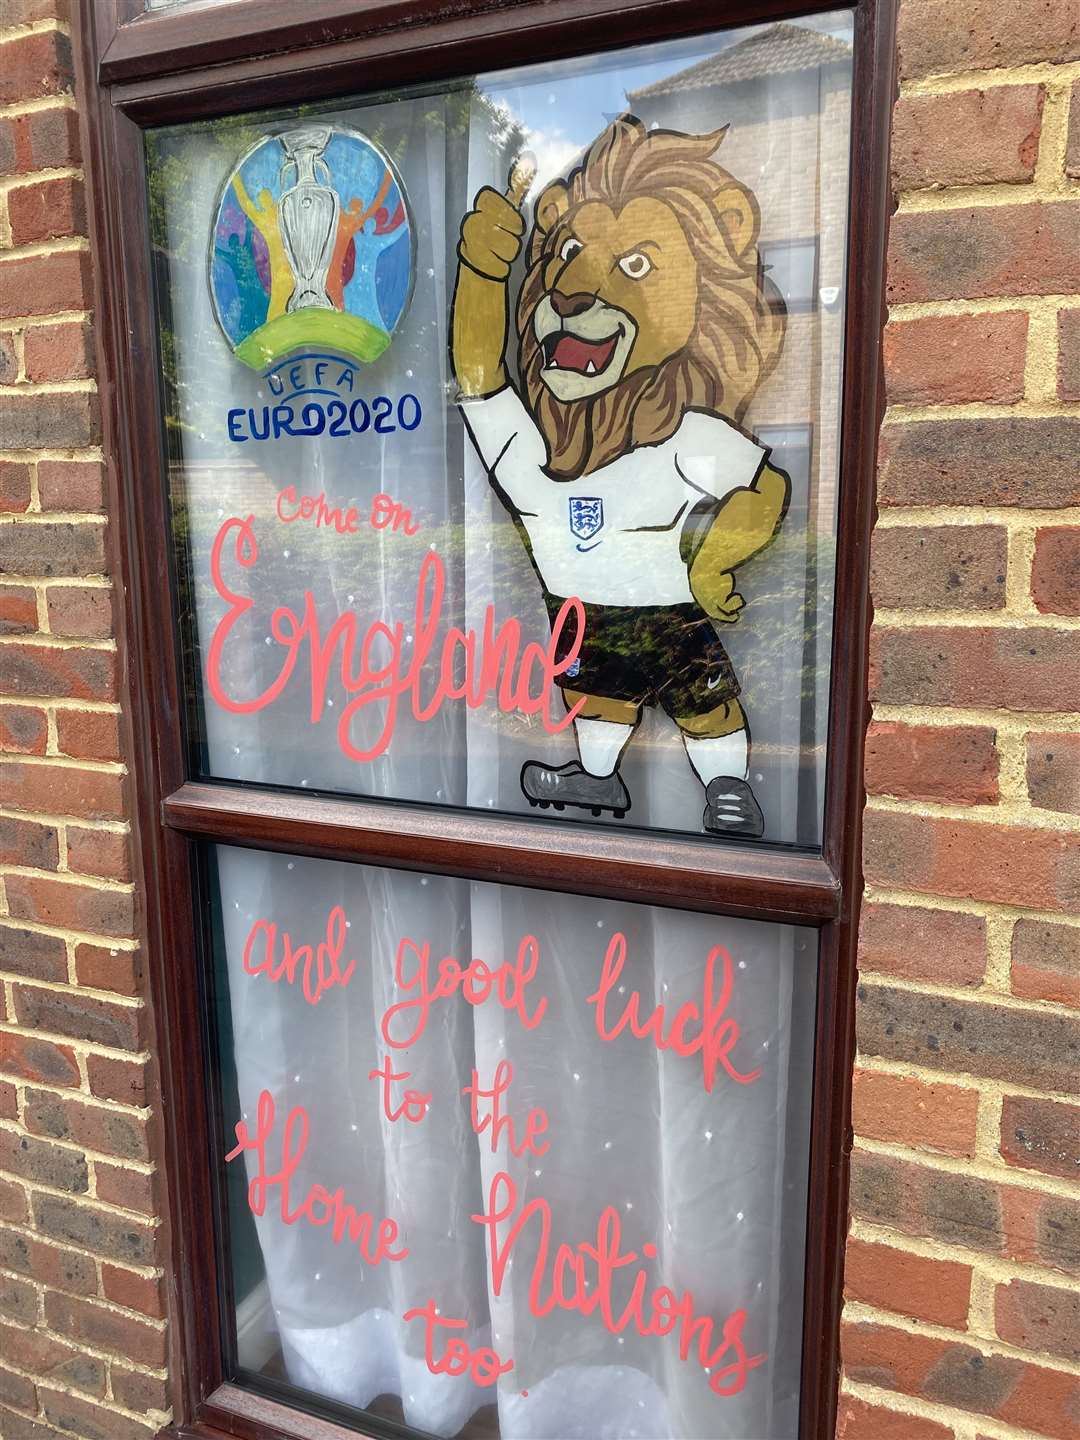 Face painter Nikki Lumbard has used her skills to decorate her window to wish England goodluck in the Euros, at her Mayfair Avenue Home in Maidstone Picture: Nikki Lumbard (48929197)